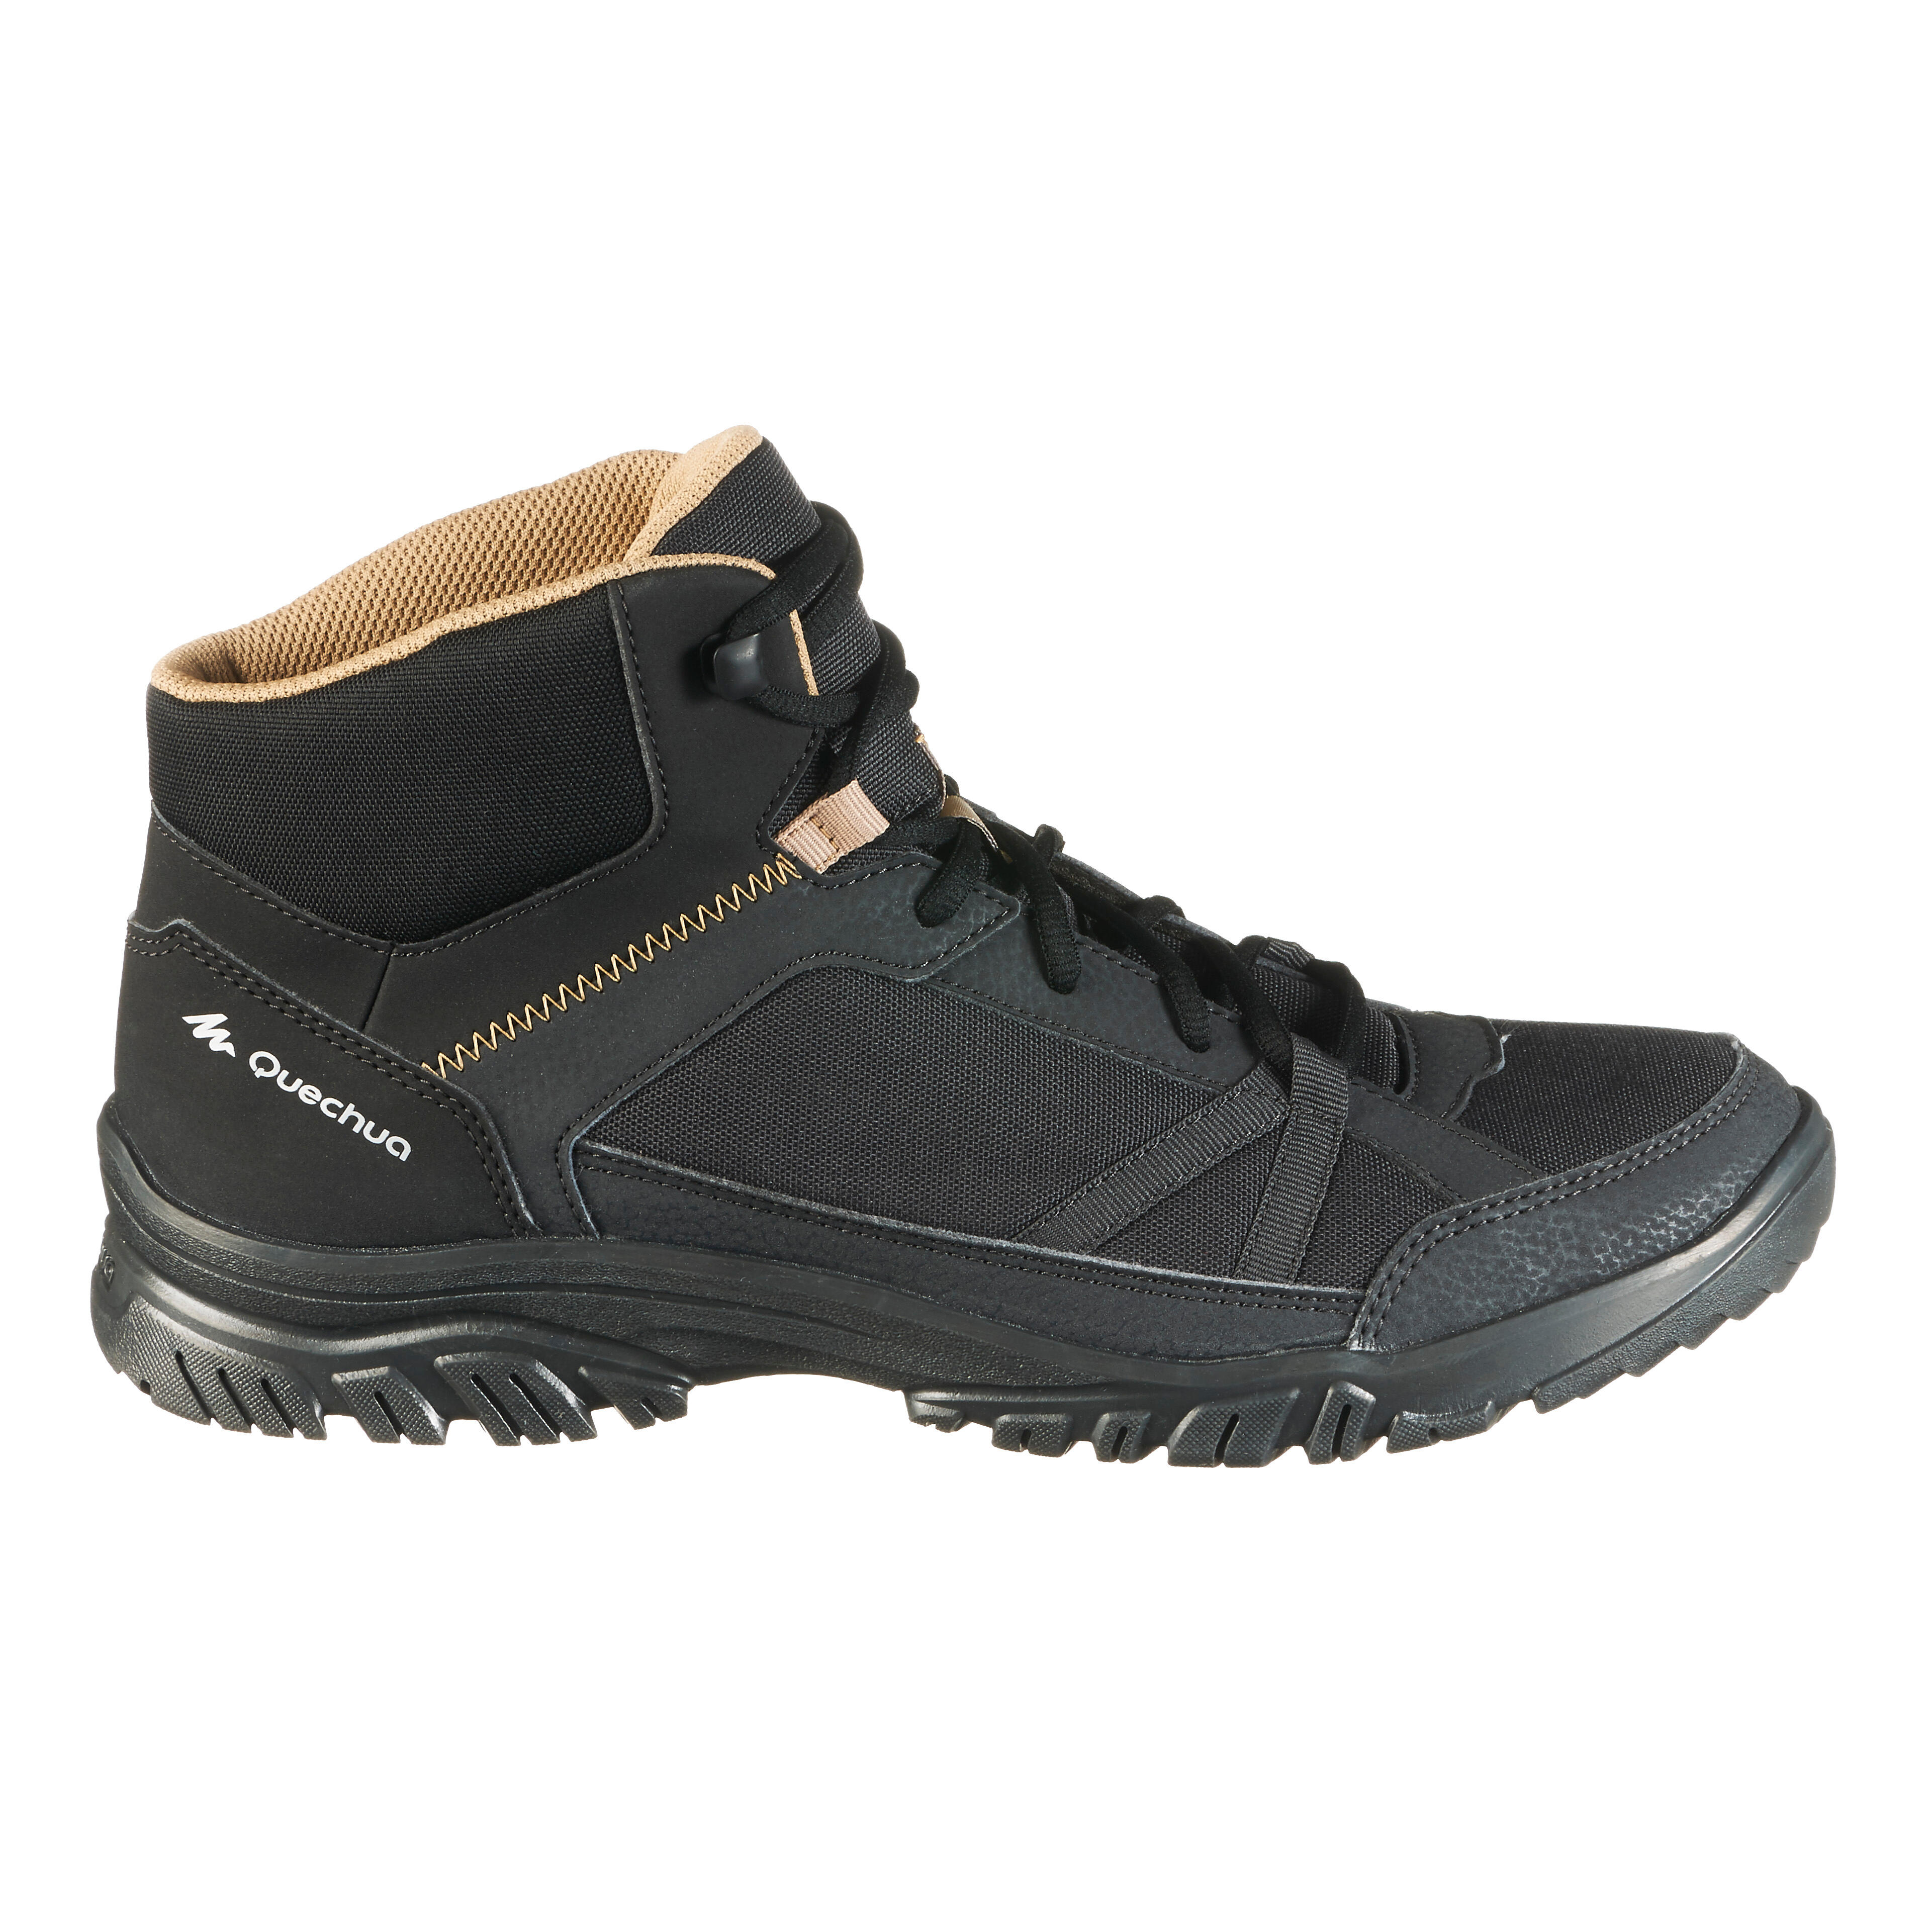 Men's Country walking boots – NH100 Mid